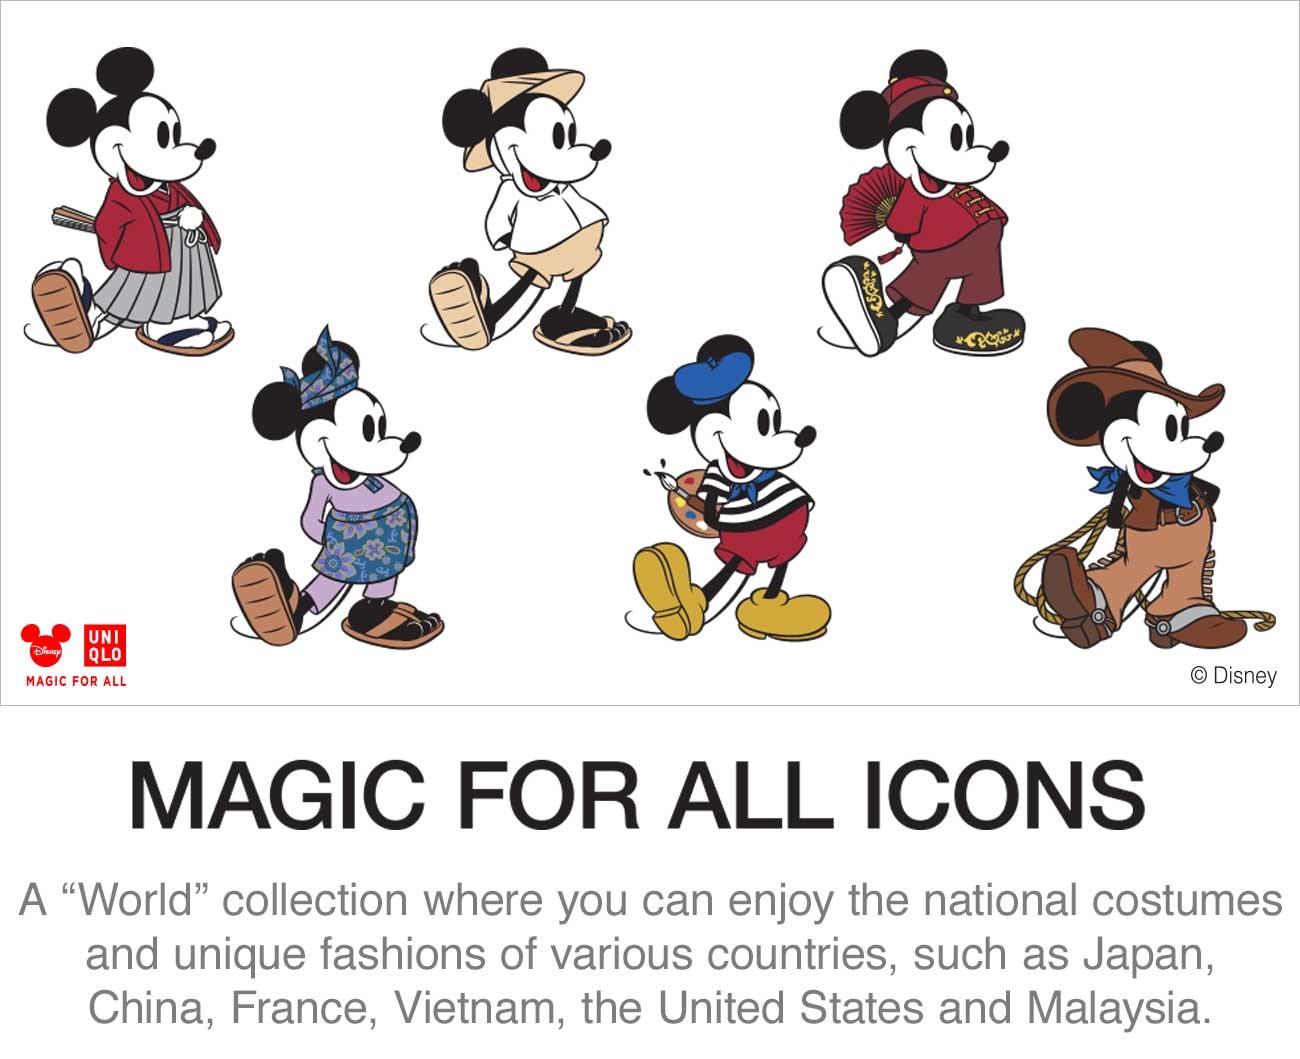 MAGIC FOR ALL ICONS